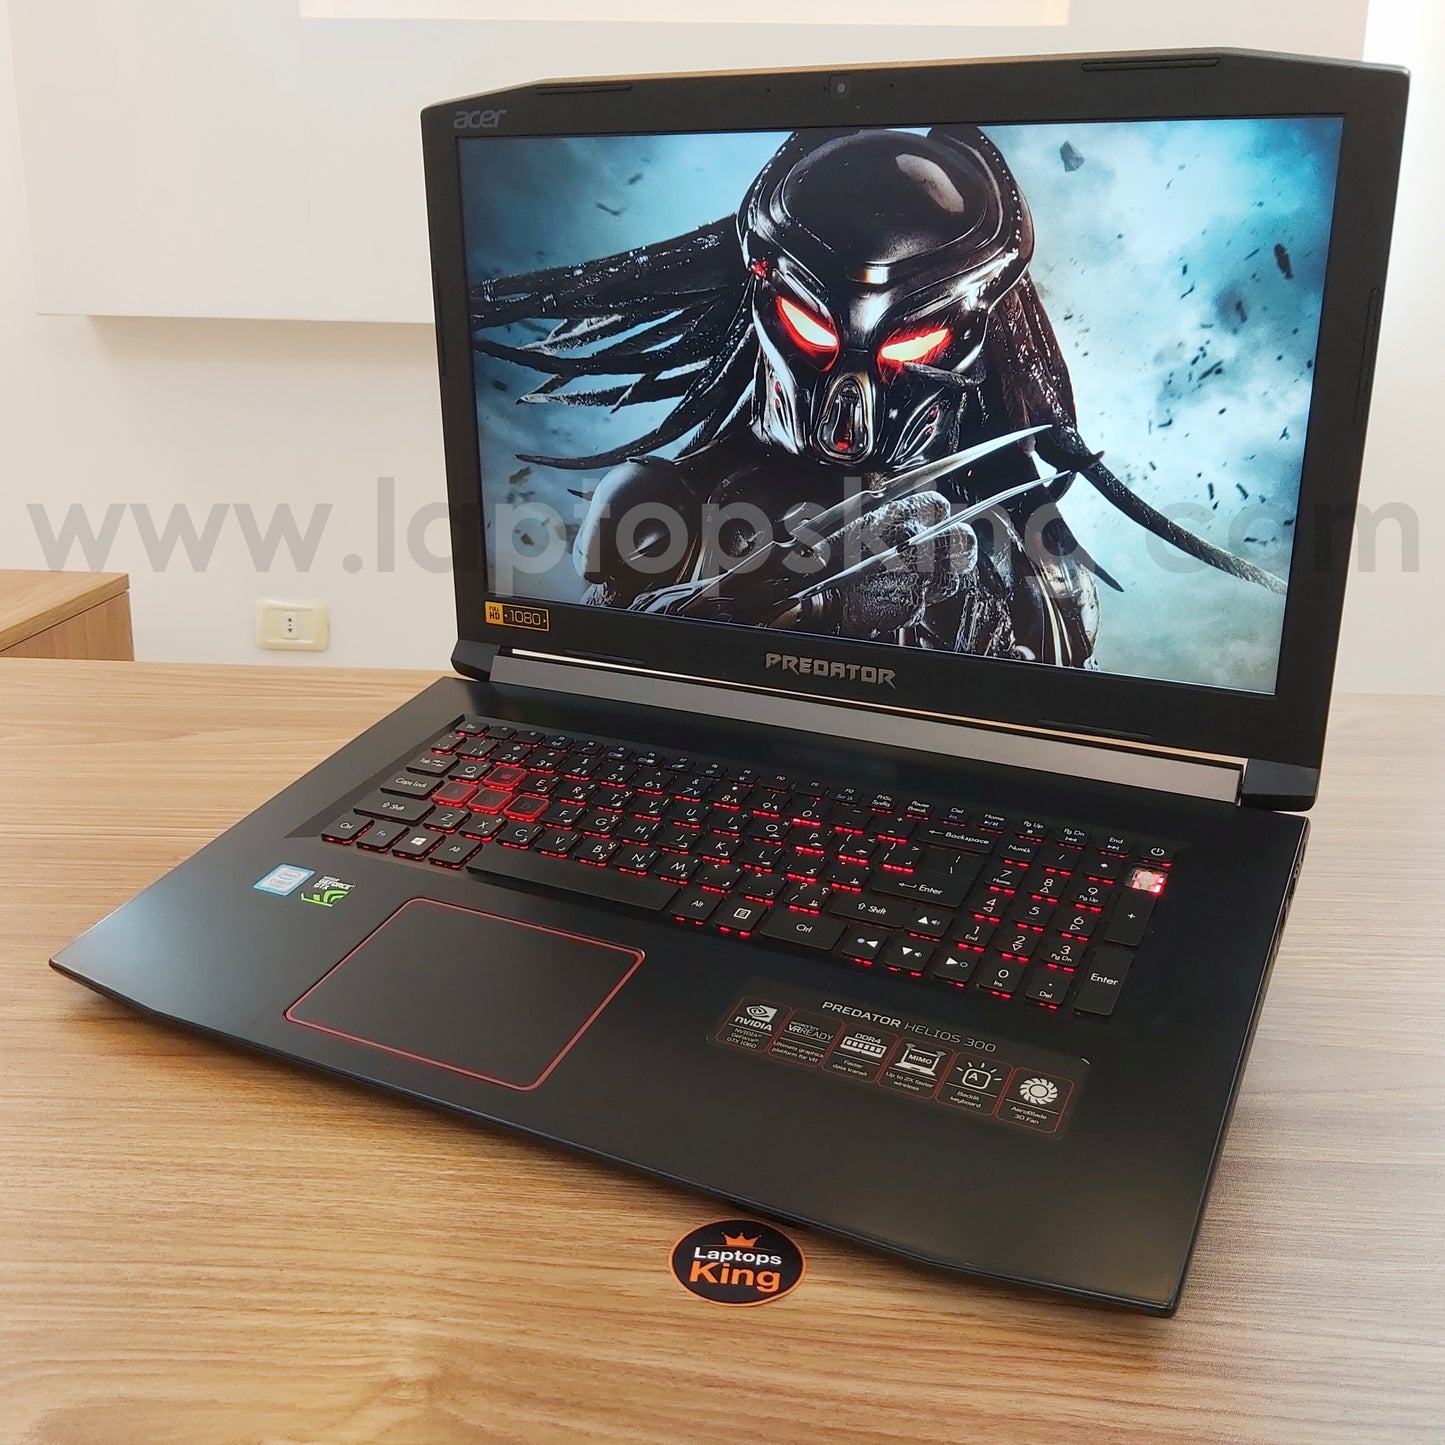 Acer Predator Helios 300 PH317-51 i7-7700HQ Gtx 1060 17.3" Gaming Laptop (Used Very Clean)